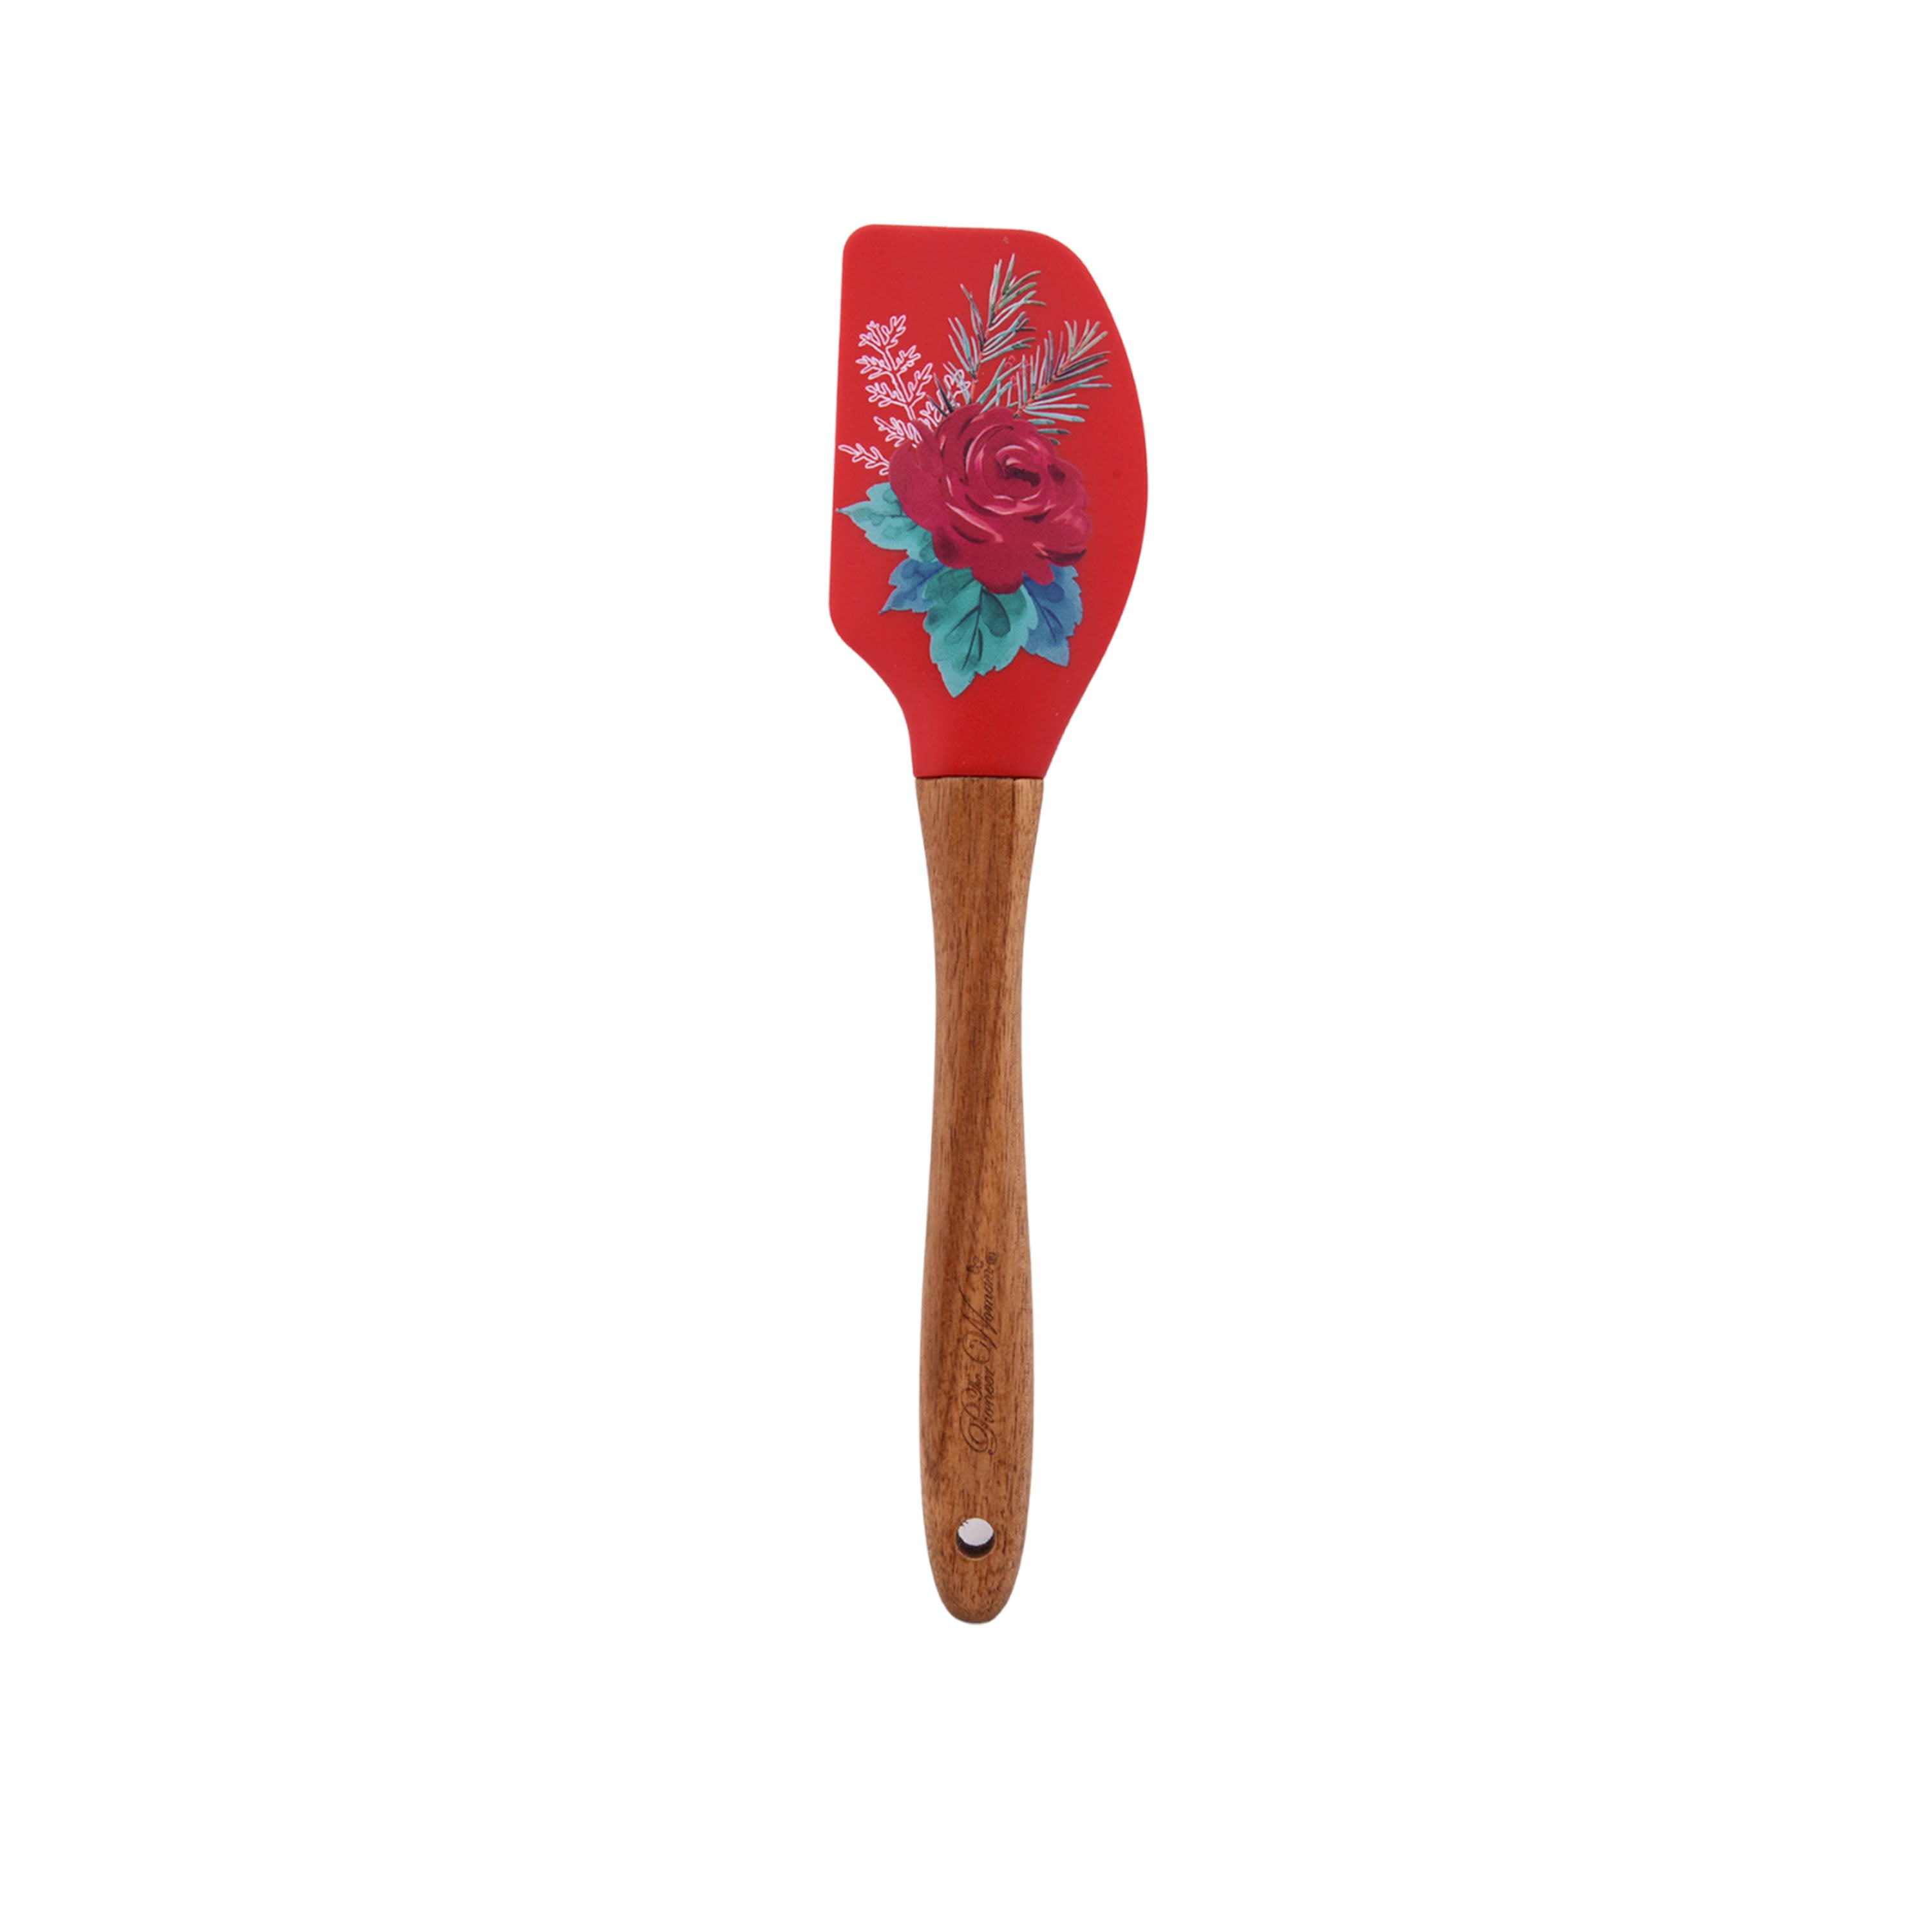 3pc Plastic/silicone Mixing Bowl With Whisk And Spatula Gift Set Red -  Figmint™ : Target